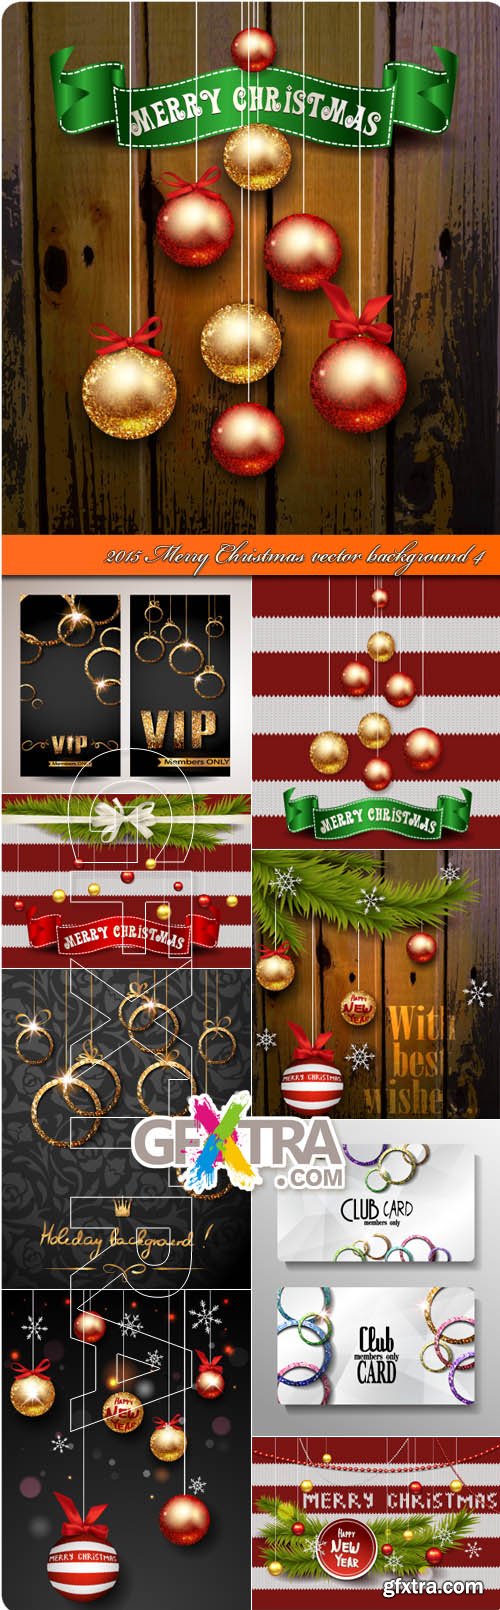 2015 Merry Christmas vector background 4